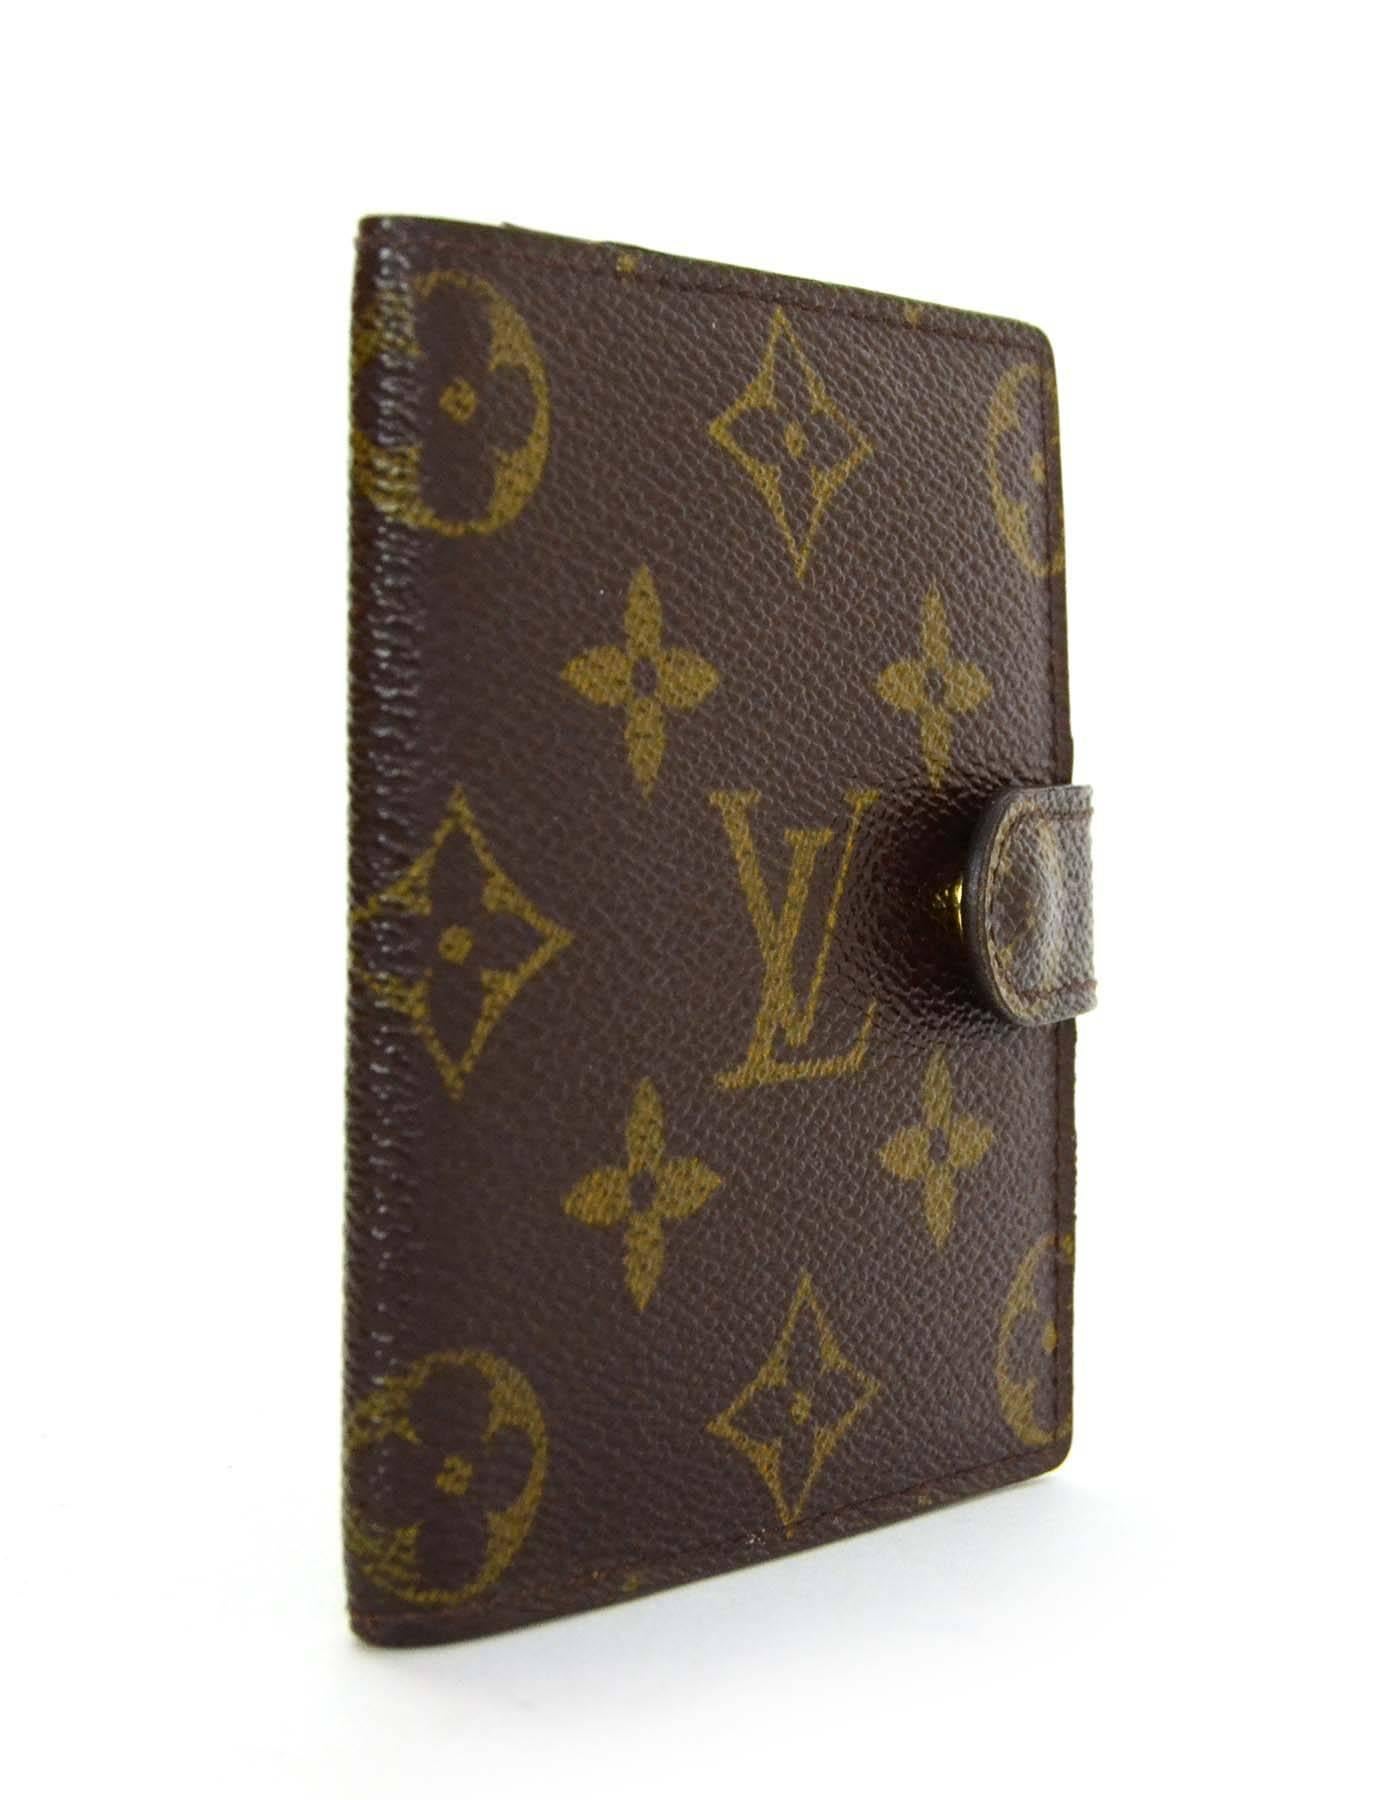 Louis Vuitton Monogram Card Case

Made In: France
Year of Production: 2001
Color: Brown
Materials: Coated canvas
Lining: Brown coated canvas
Hardware: Gold-tone
Closure: Side snap button closure
Serial Number/Date Code: TH1001
Exterior